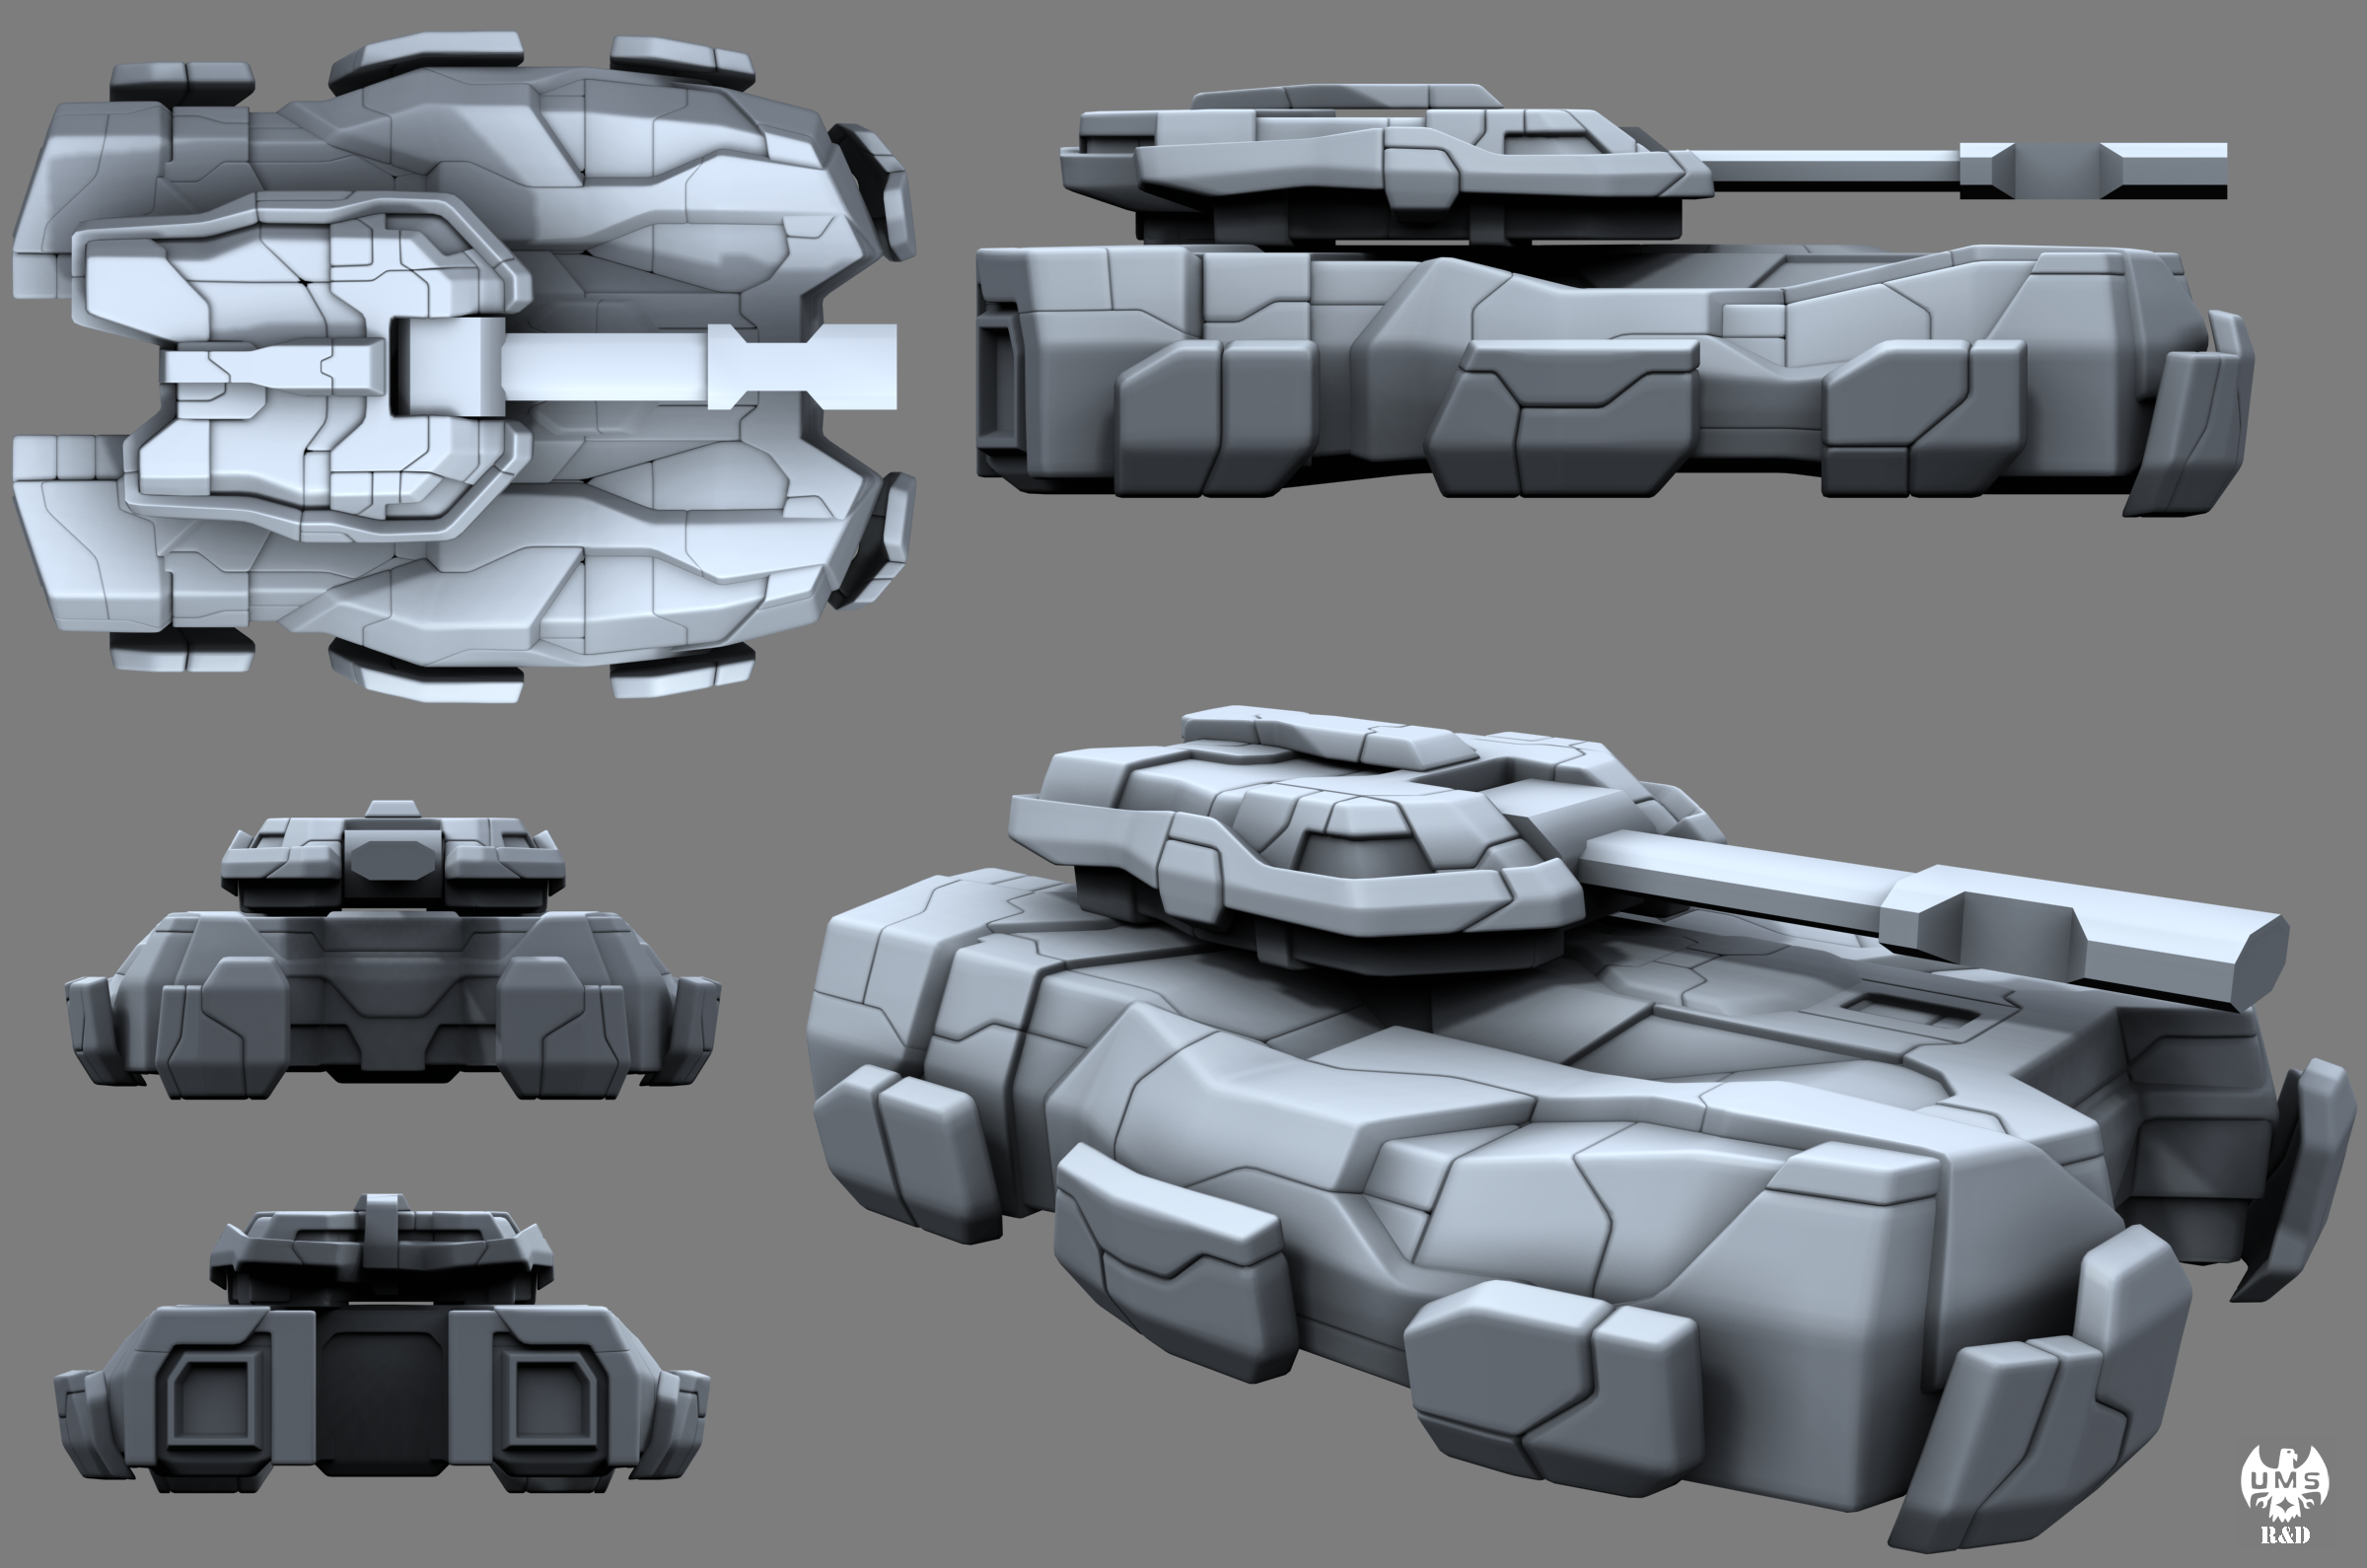 ums_hover_tank_concept___unreal_99_mod_b